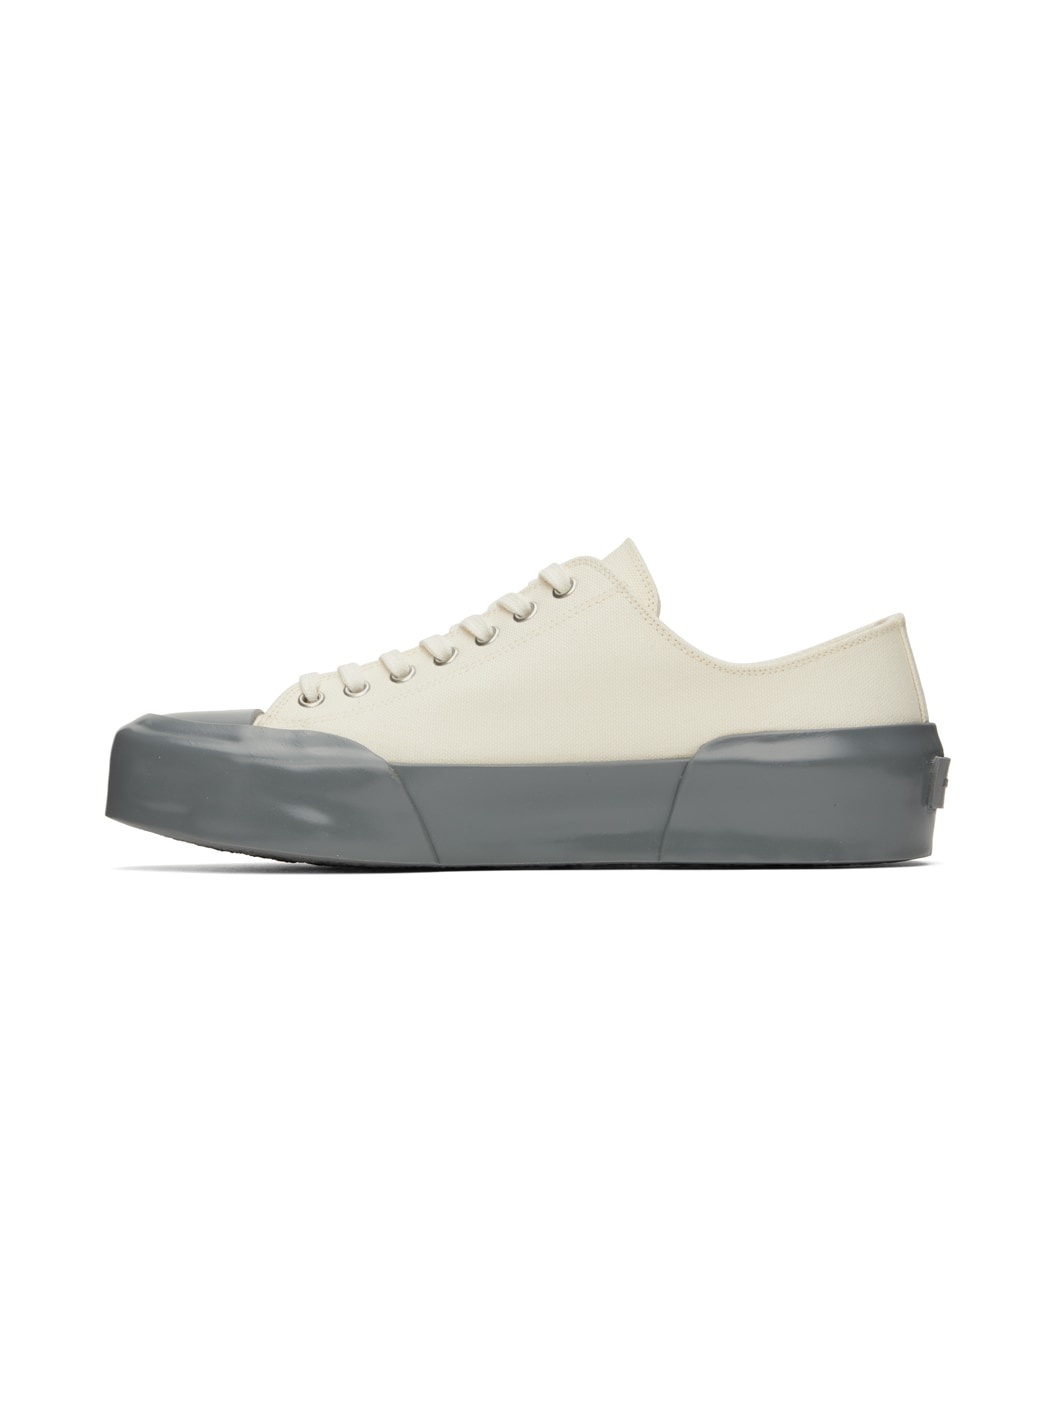 White & Gray Low-Top Sneakers - 3